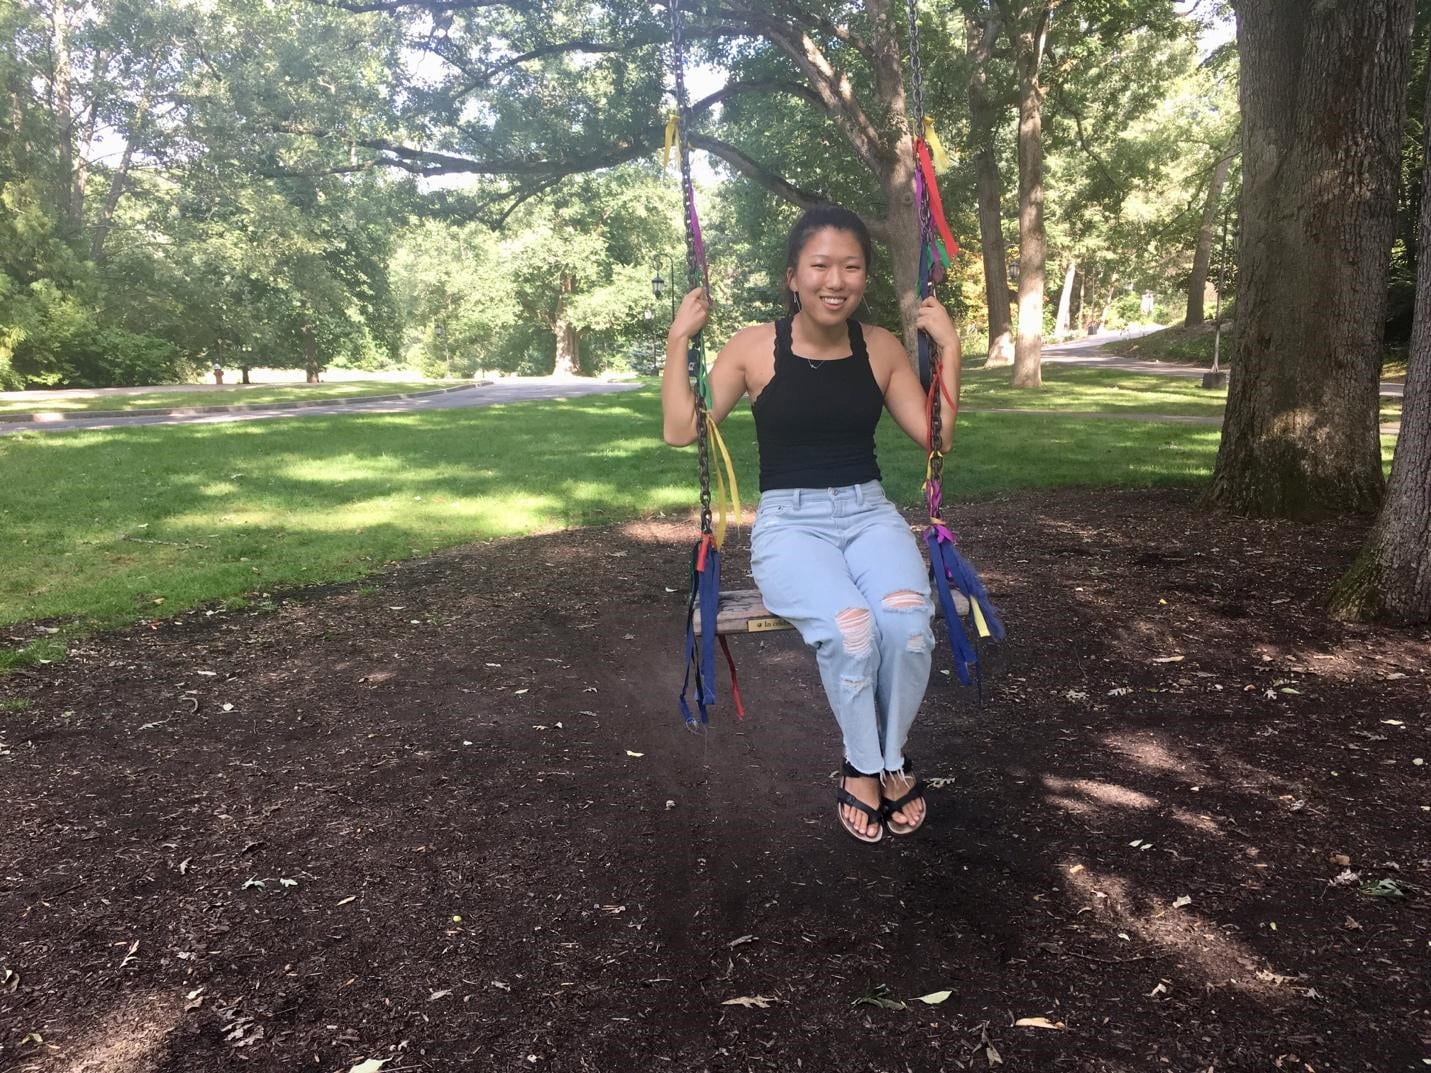 Emily on a swing